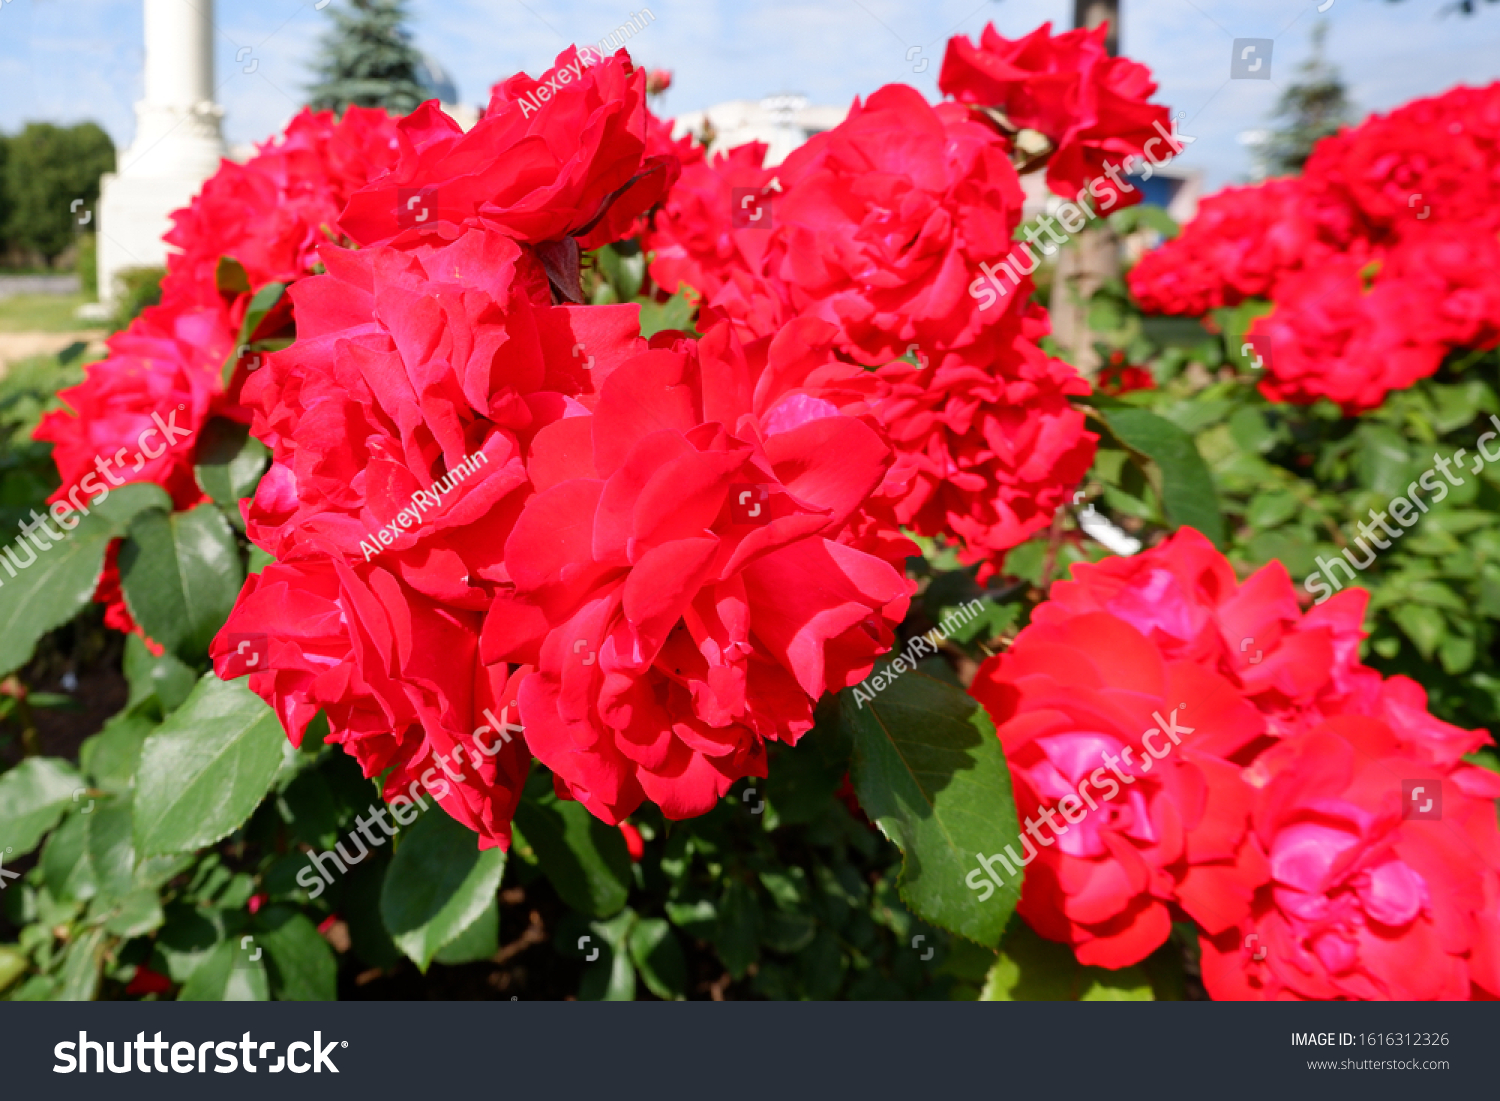 Several fresh red blooming roses on rose bush close up view